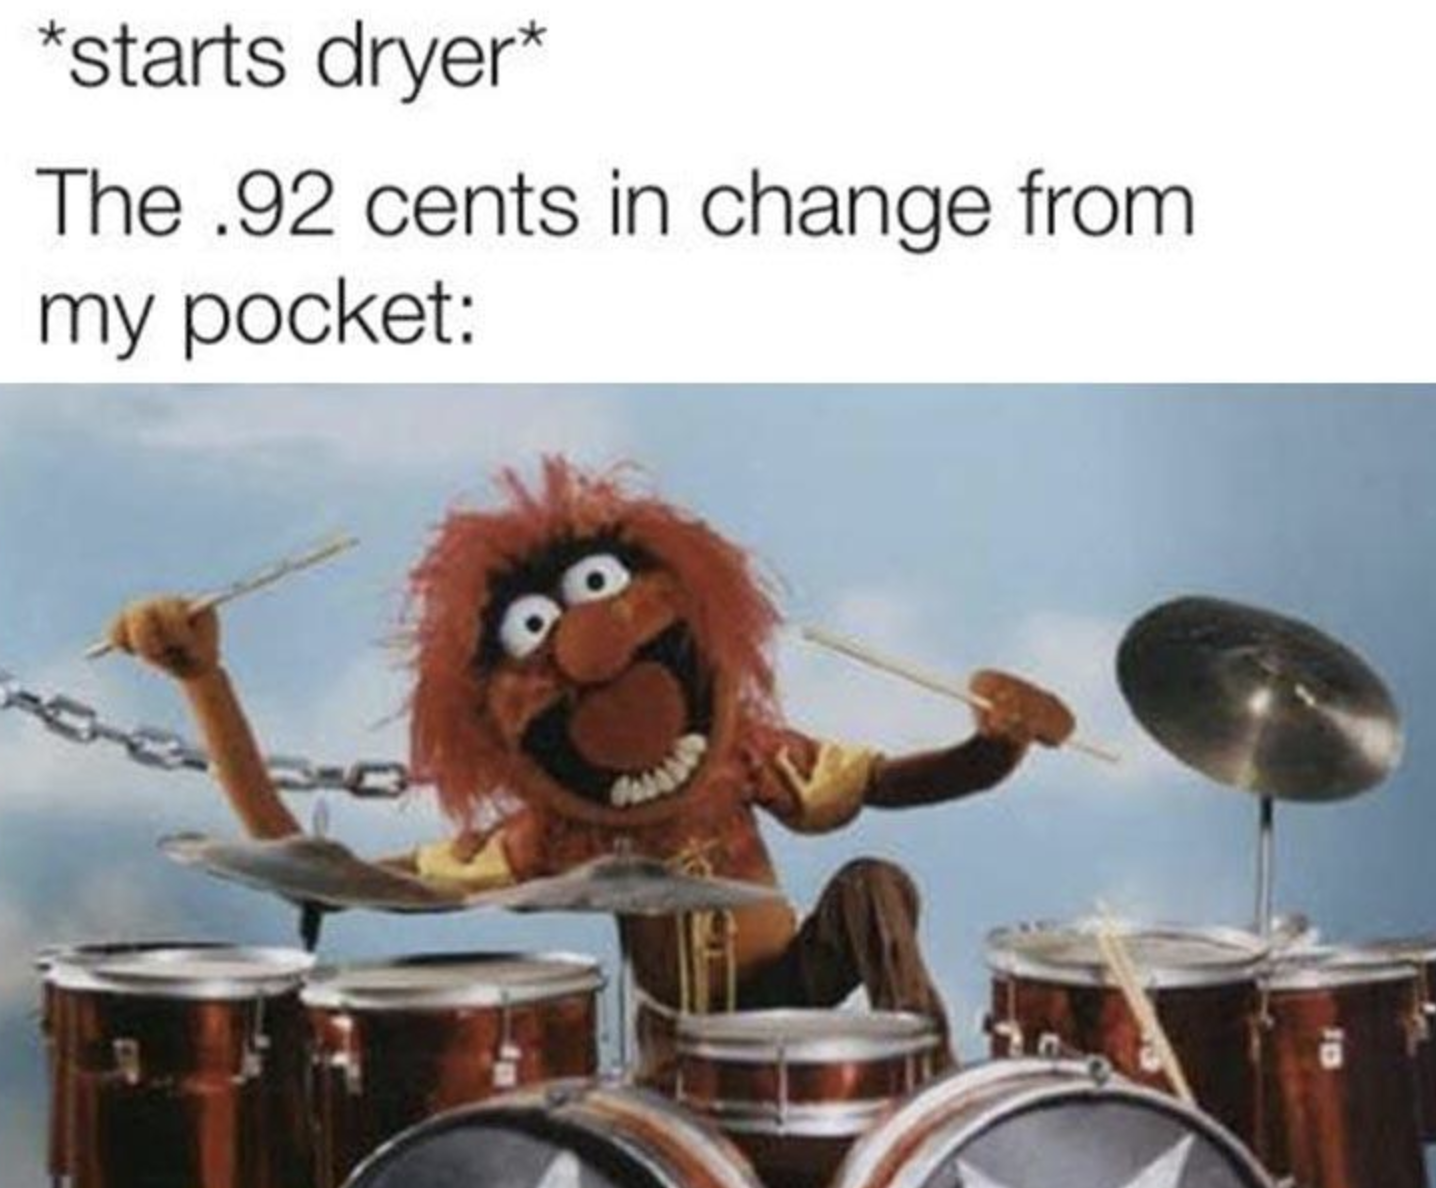 33 Awesome Memes to Take a Break With